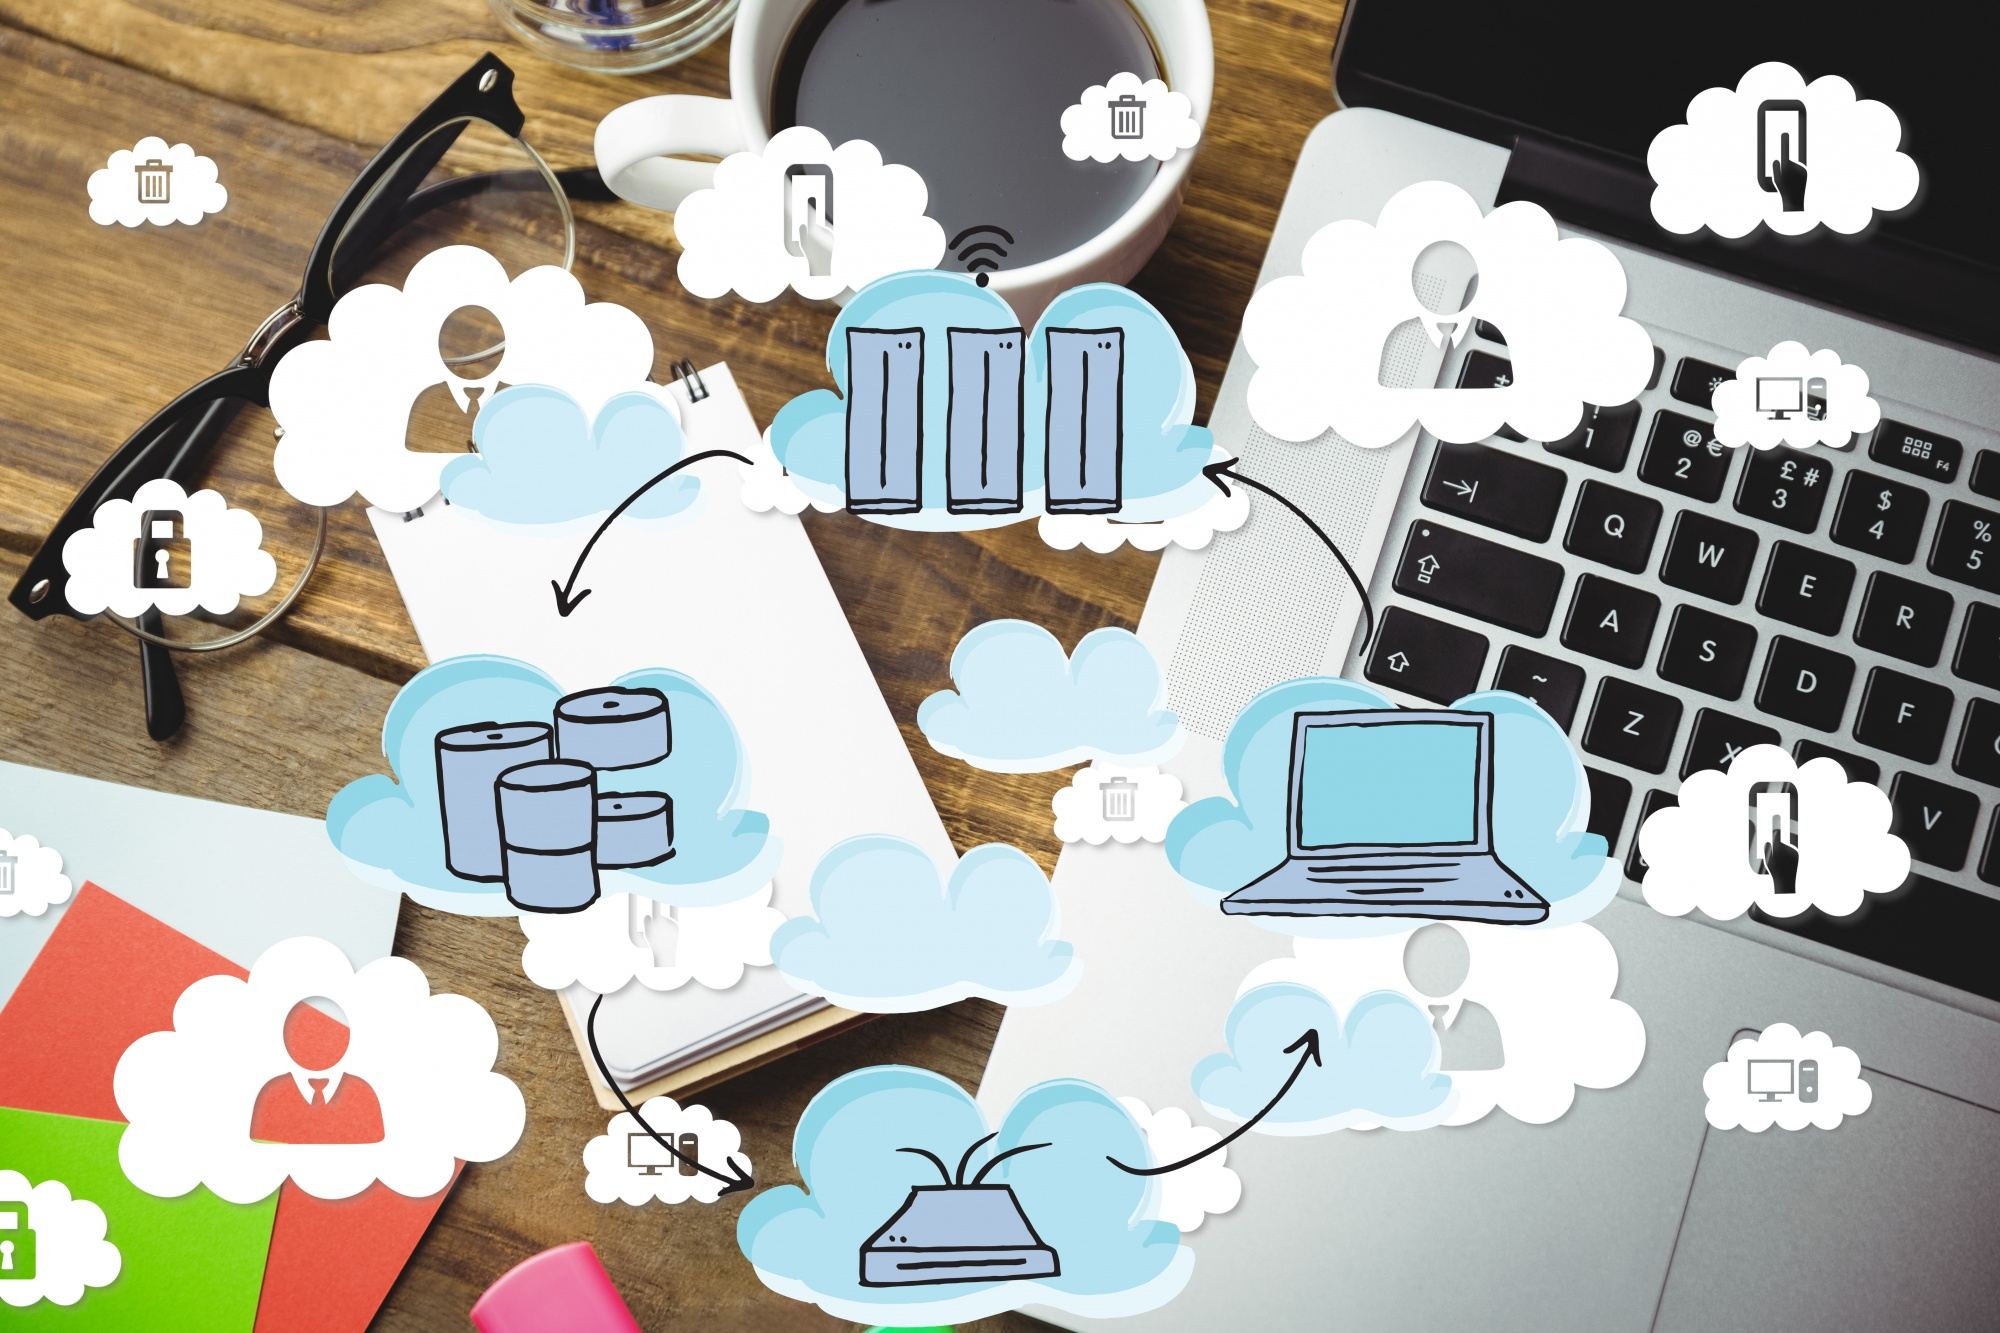 Cloud Governance: Managing Cloud Resources Effectively